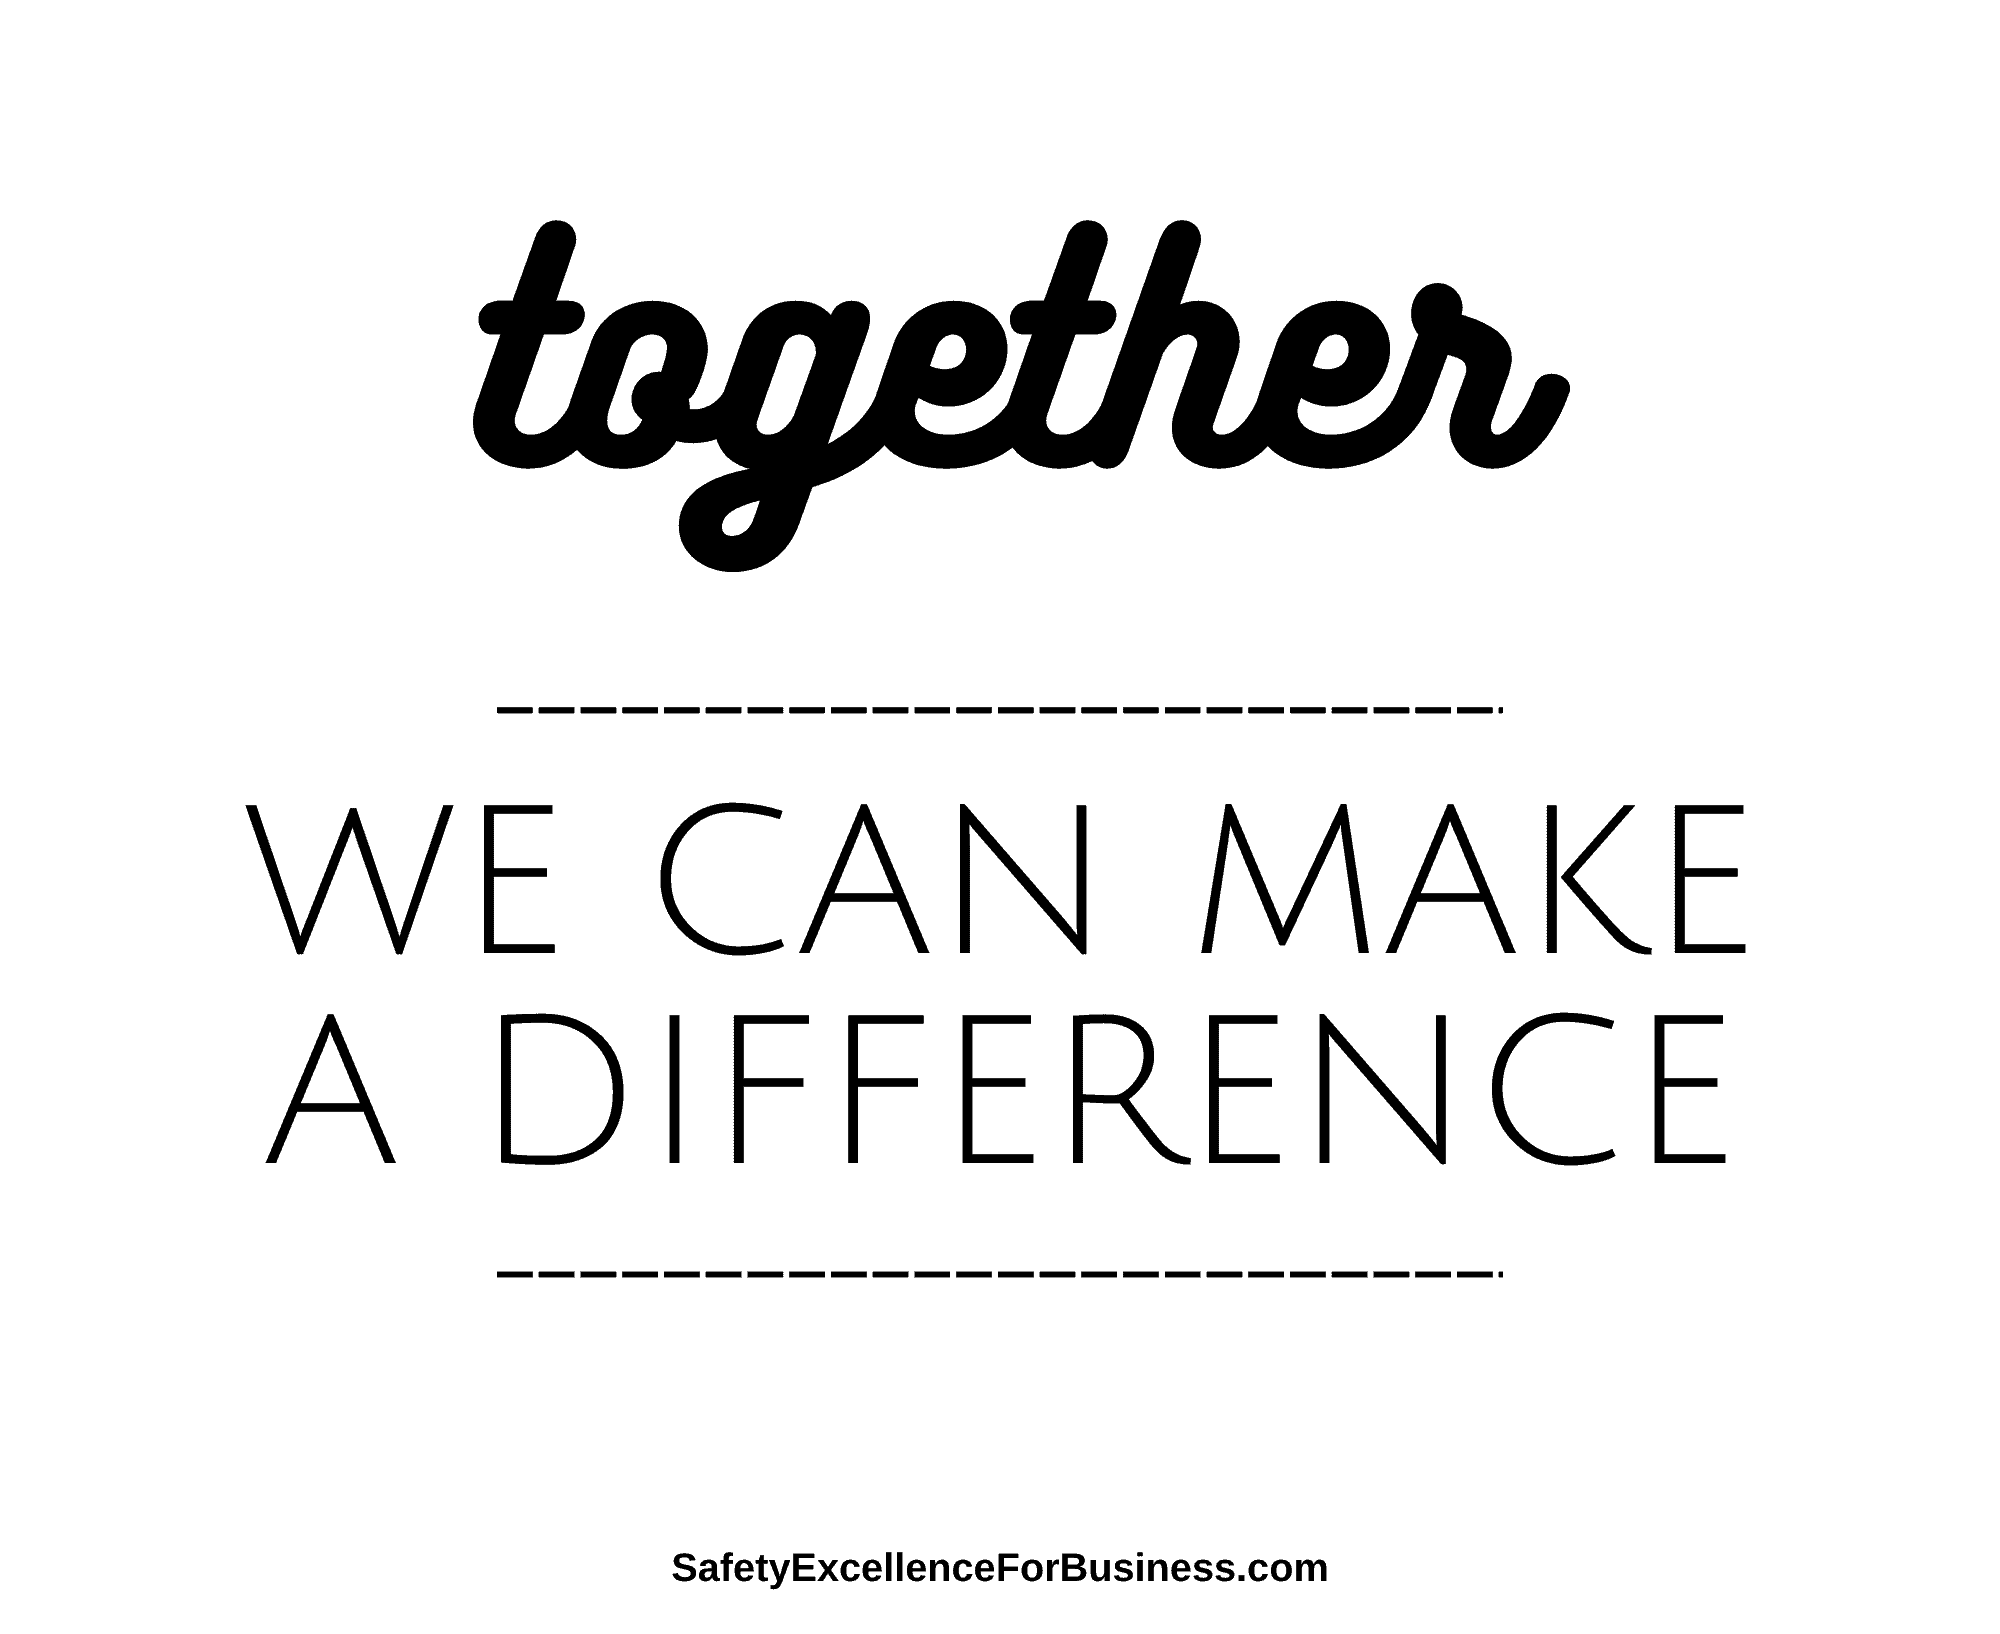 we can make a difference for workplace safety by working together